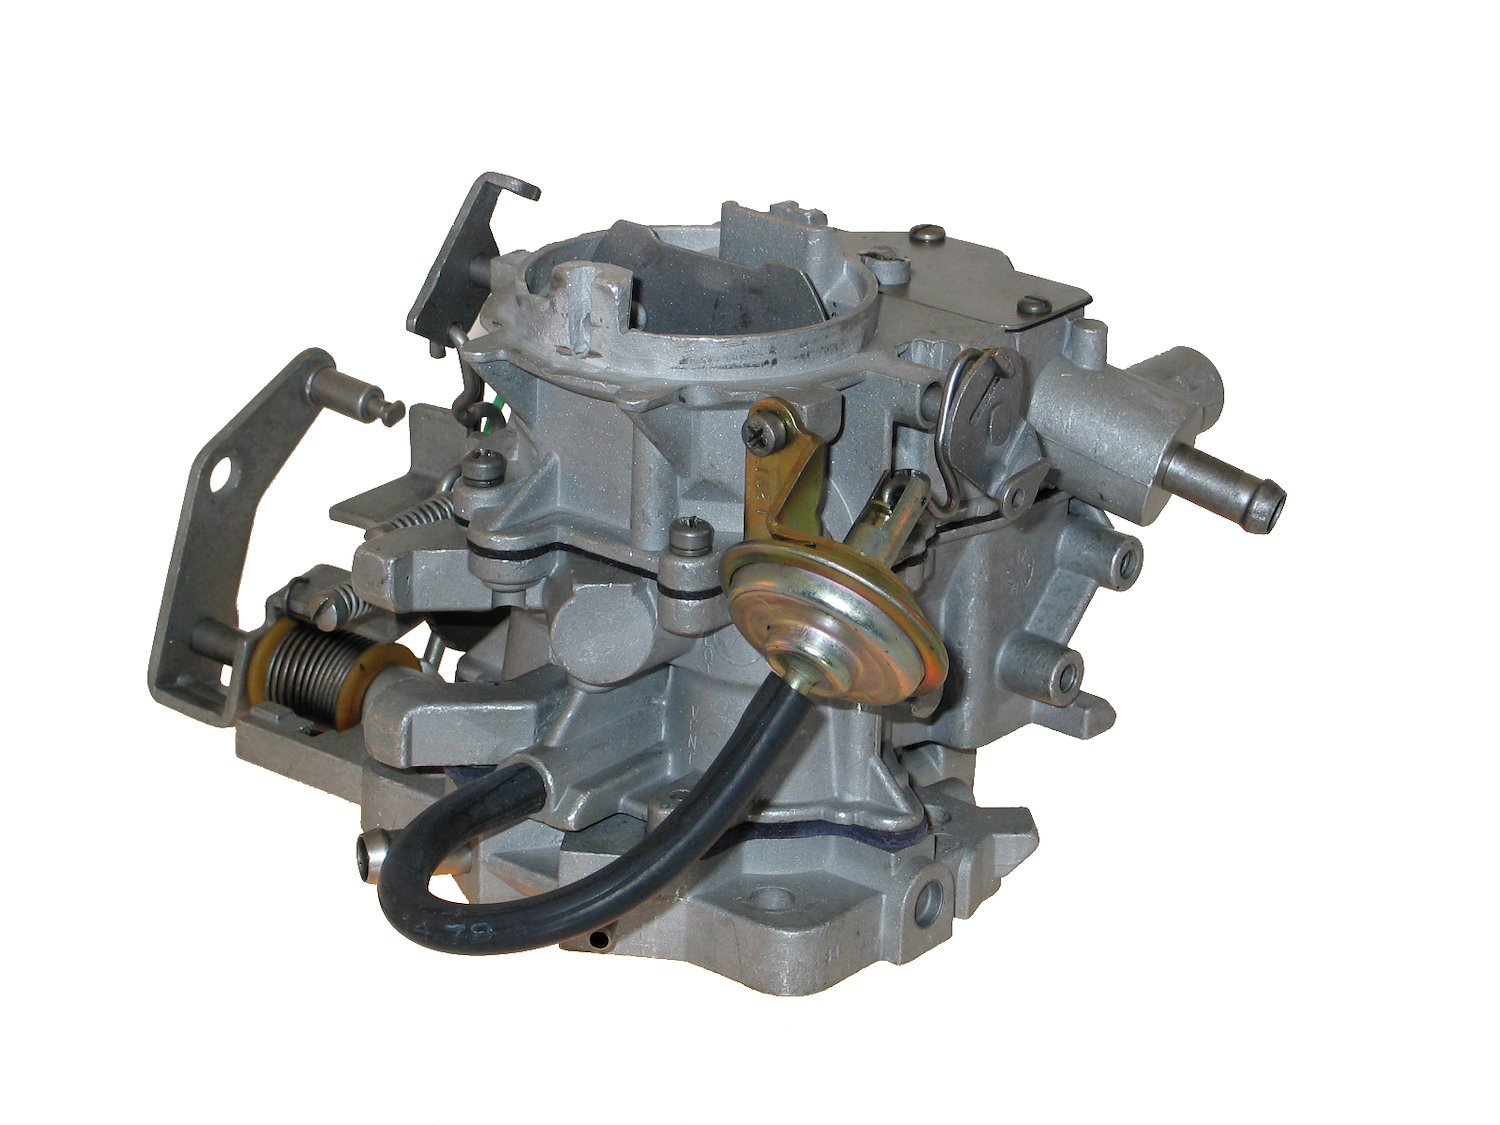 6-6336 Holley Remanufactured Carburetor, 6280-Style